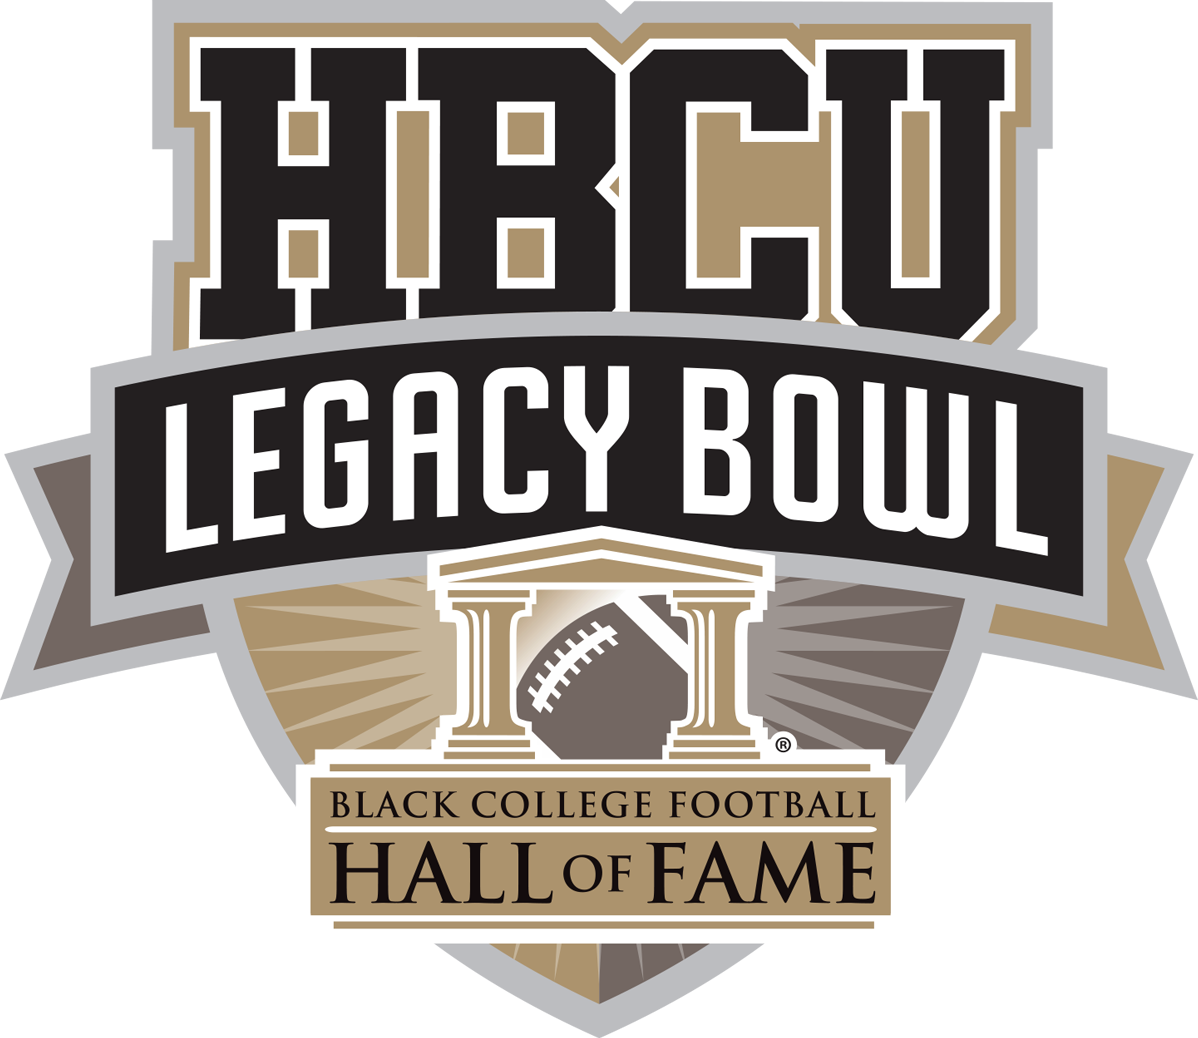 The HBCU Legacy Bowl has signed a player and a balltracking agreement